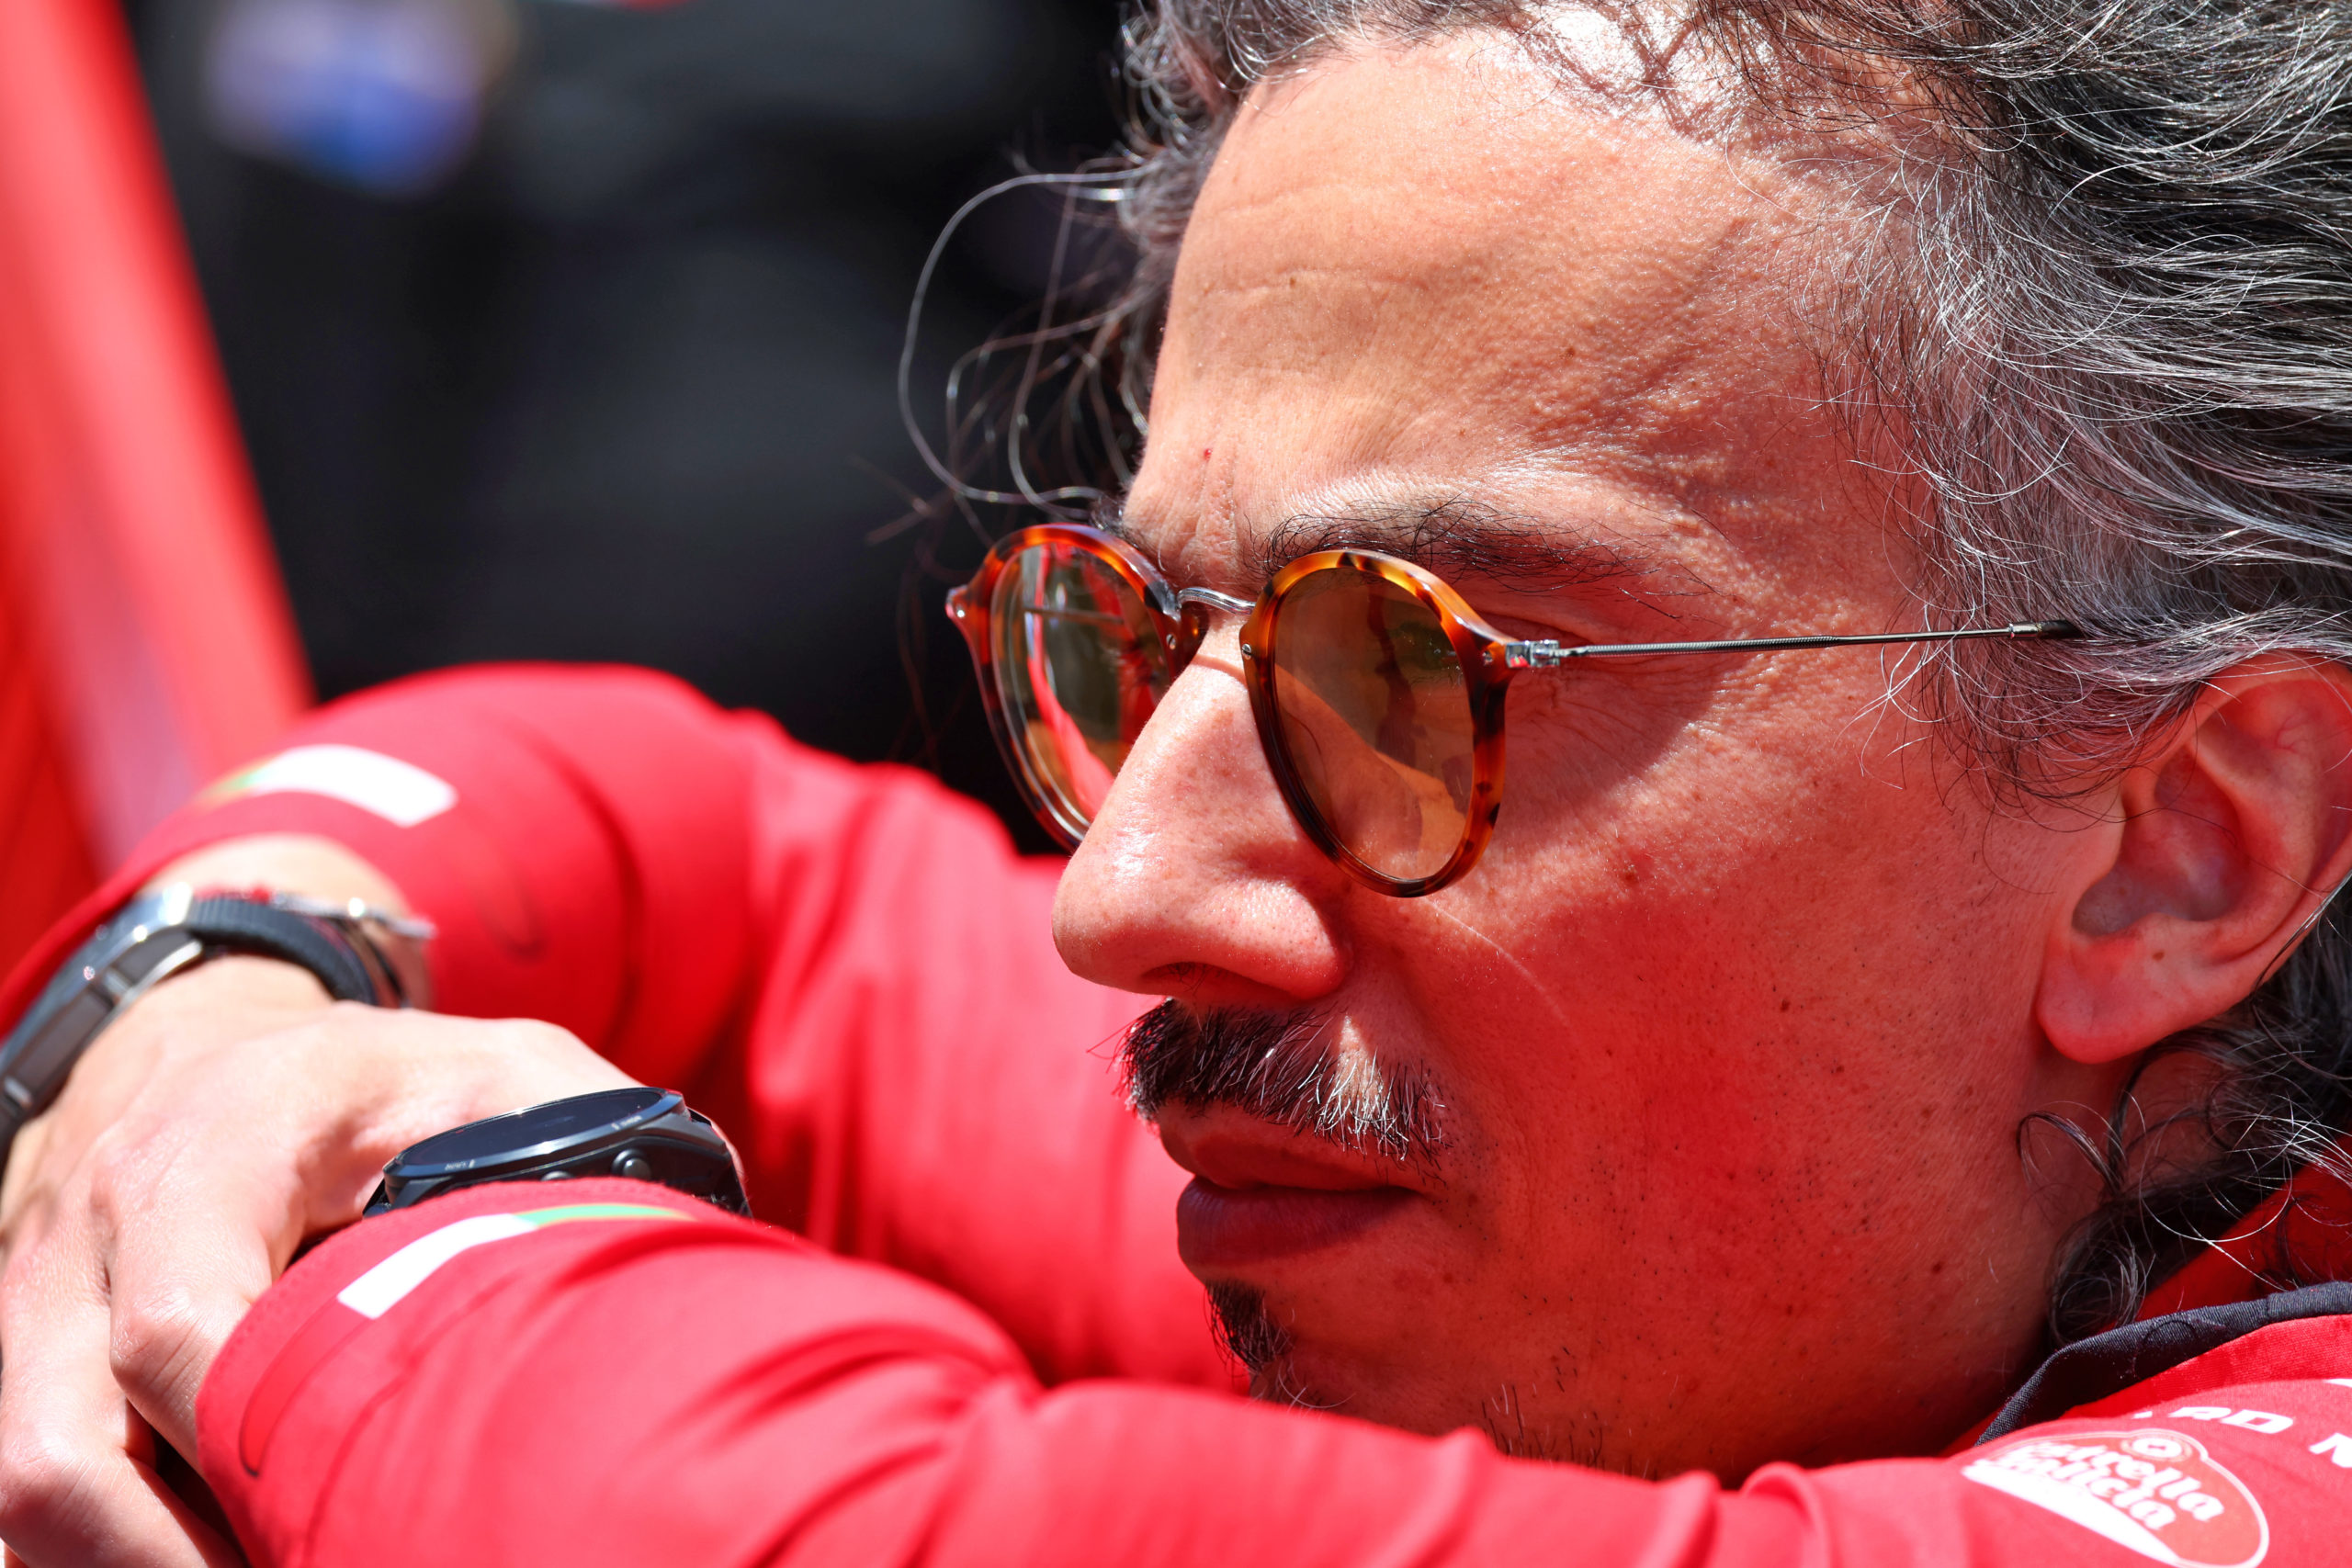 only ‘two of 1000+’ – ferrari’s answer to staff exit criticism